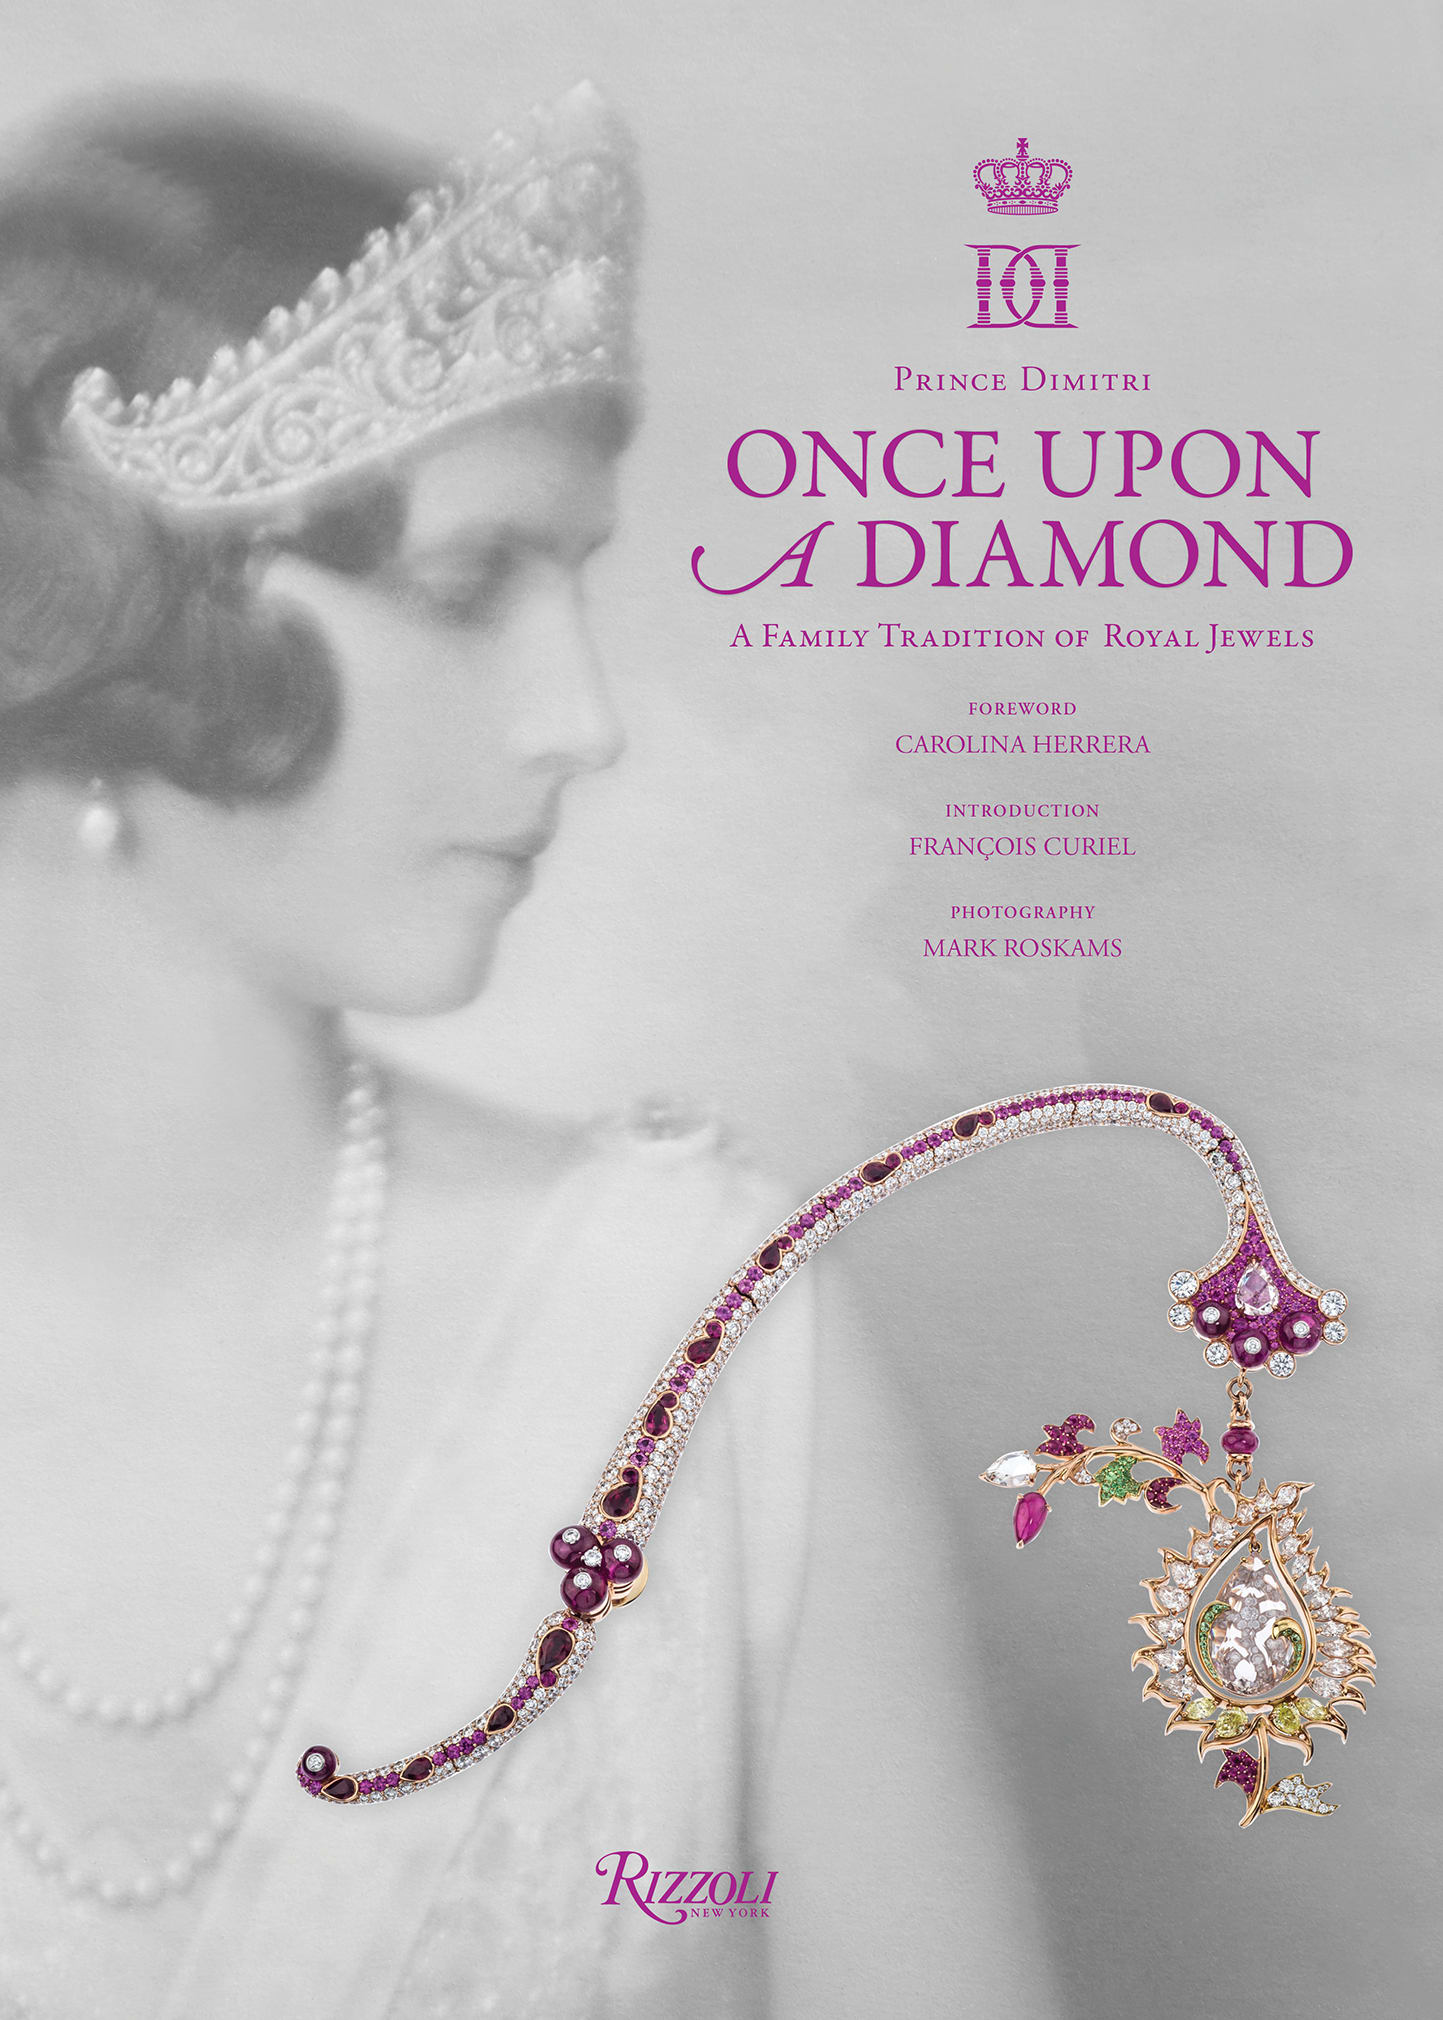 Once Upon a Diamond: A Family Tradition of Royal Jewels Book by Prince Dimitri & Lavinia Branca Snyder